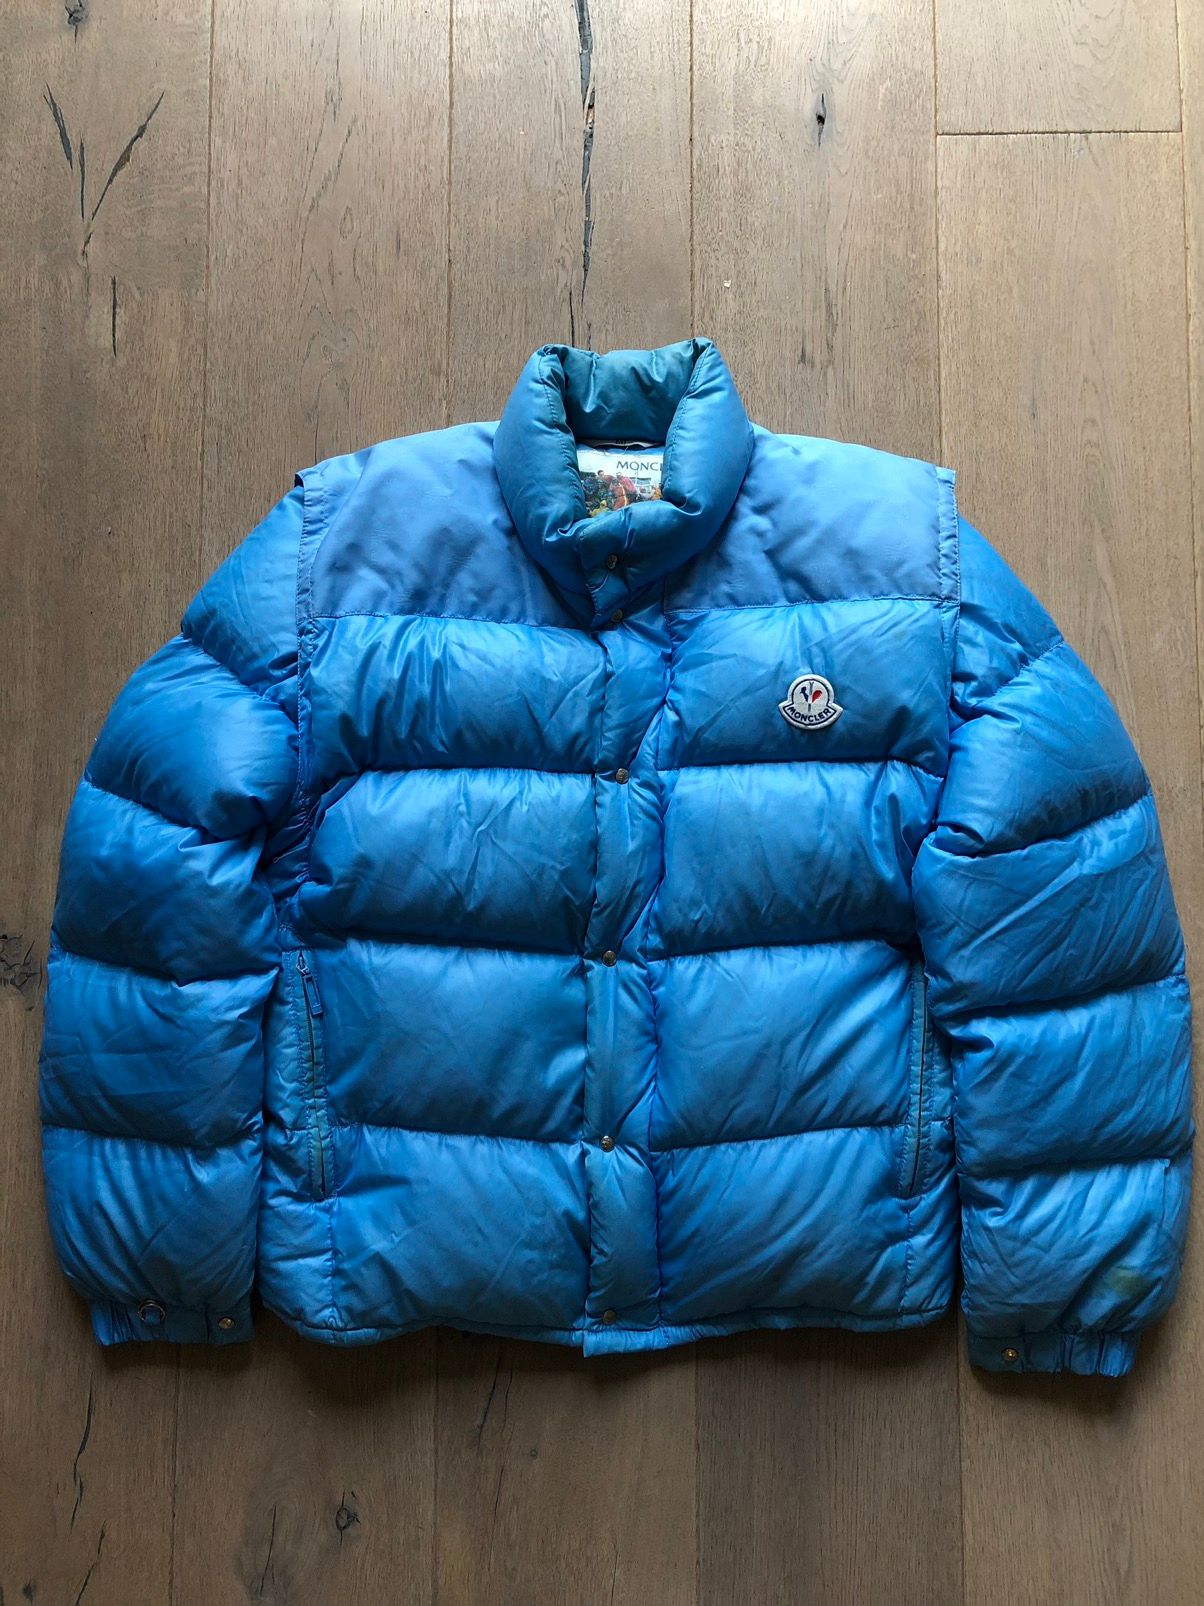 Moncler Moncler 80s Puffer Down Removable Sleeves Jacket | Grailed